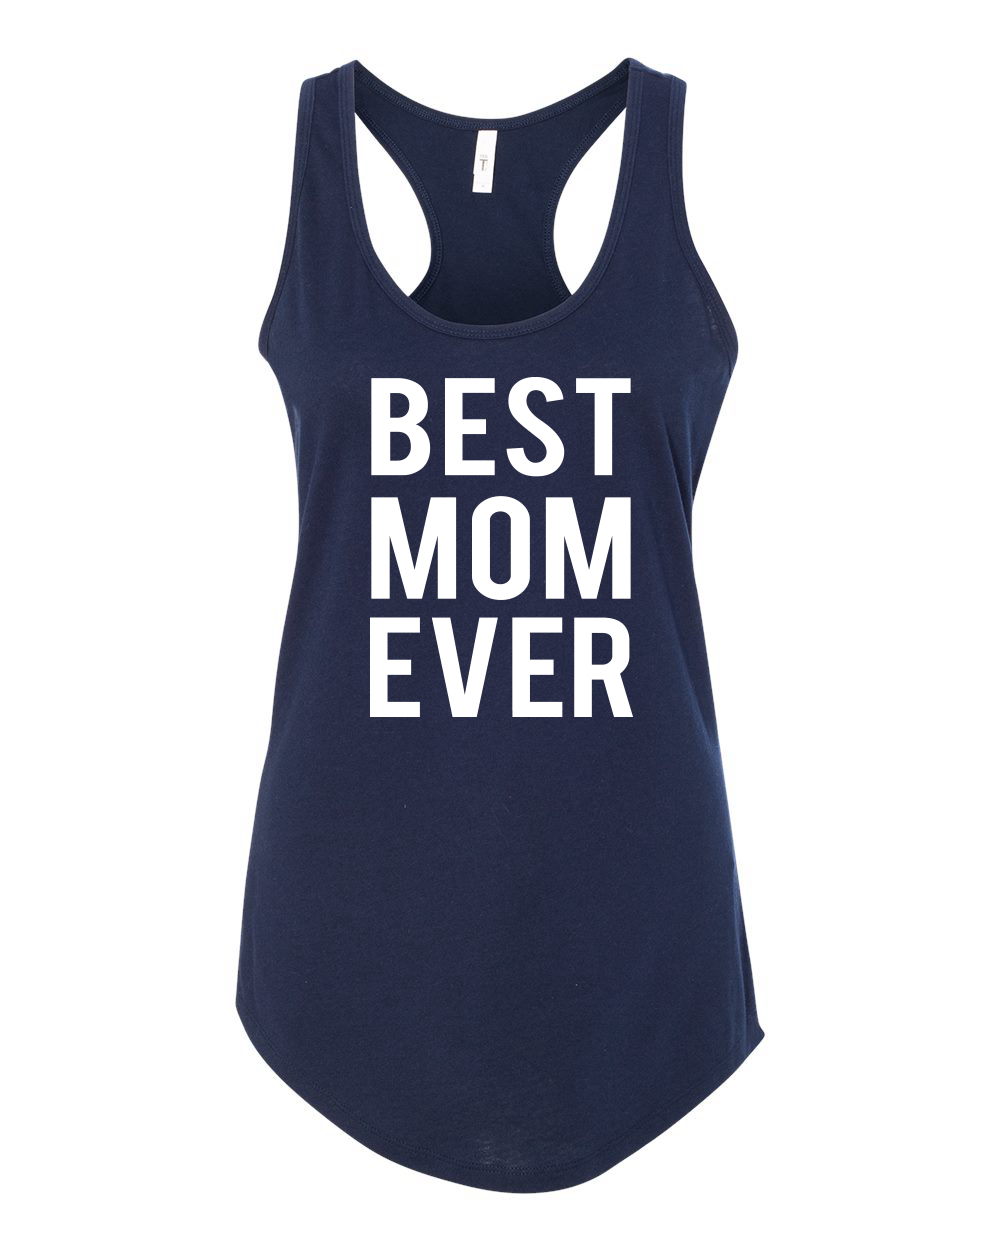 Wild Bobby, Best Mom Ever Mothers Day Gift, Mother's Day, Women Racerback Tank Top, Navy, Large - image 2 of 3